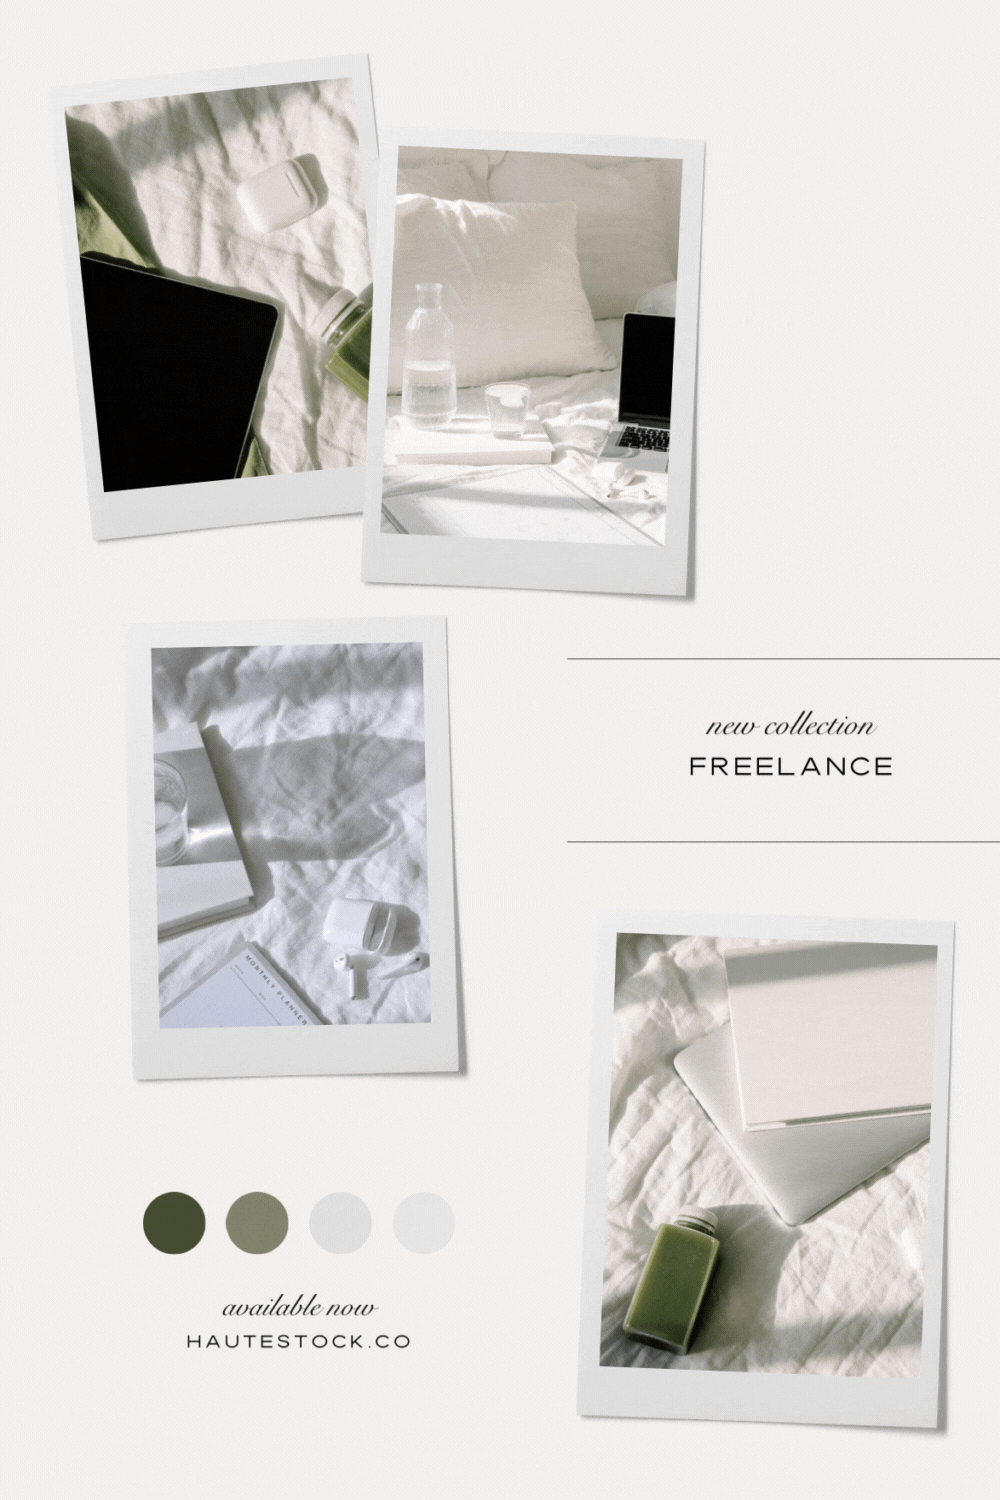 Lifestyle and workspace imagery in grey and green color palette. Stock photos and videos available at Haute Stock.